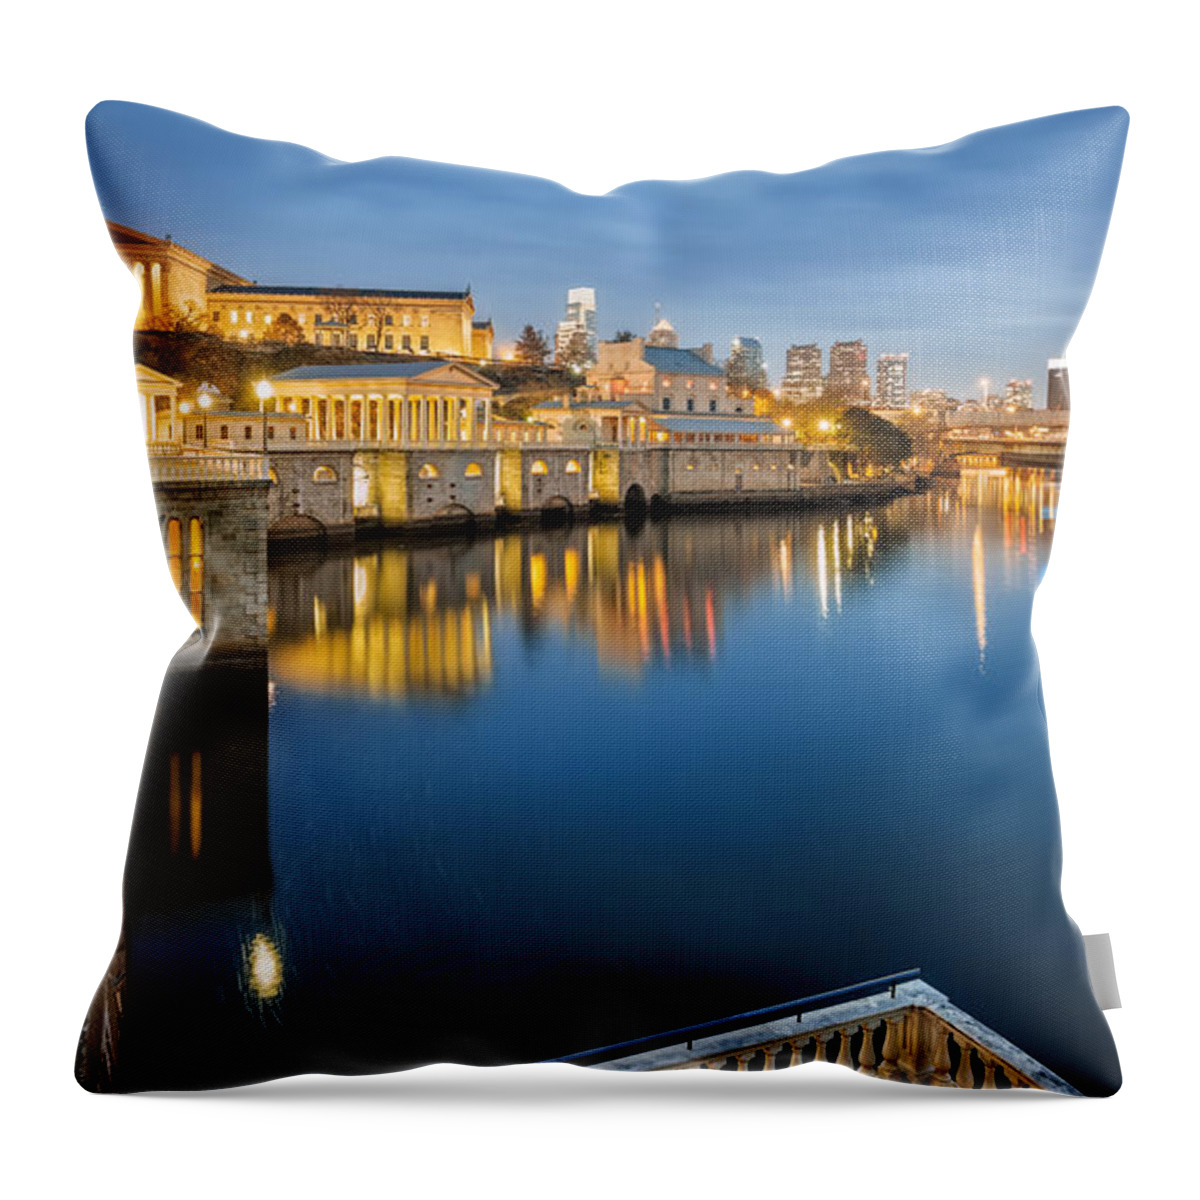 City Throw Pillow featuring the photograph The Waterworks by Eduard Moldoveanu